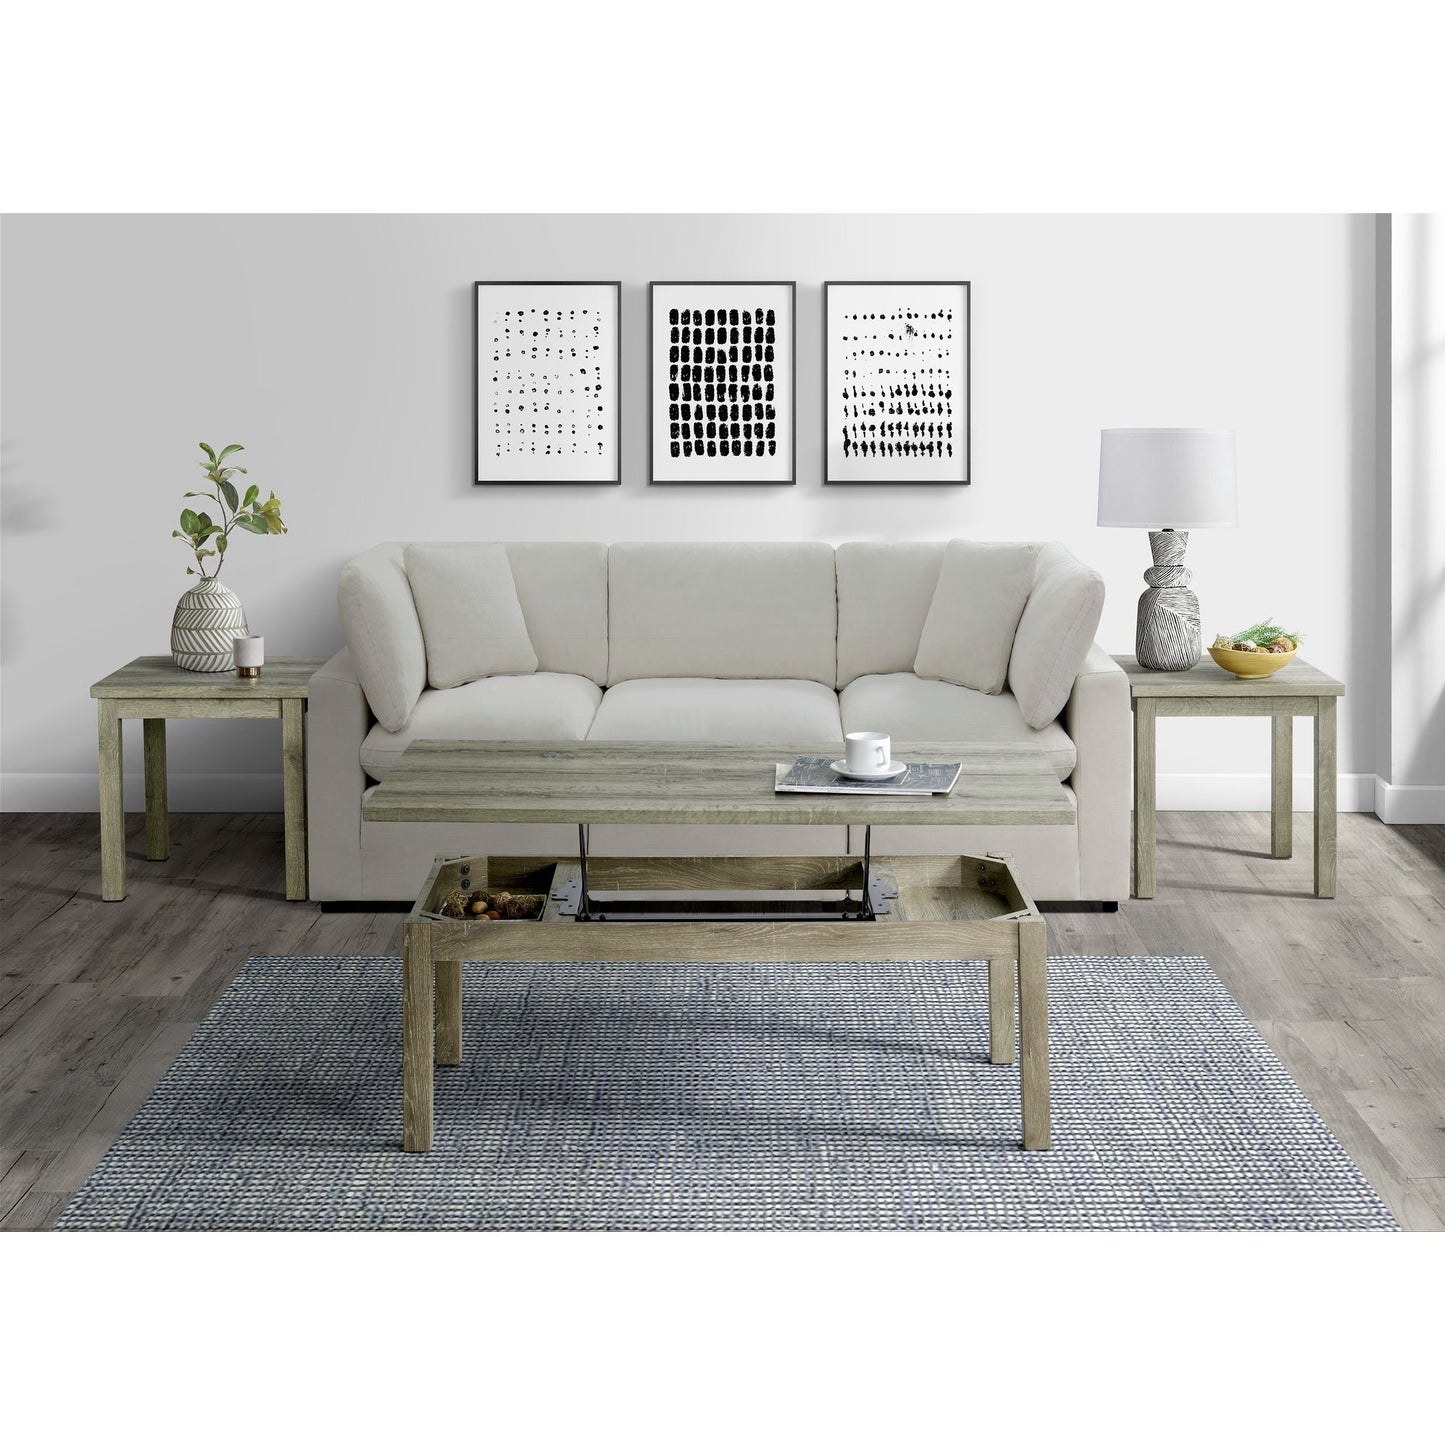 Oak Lawn - Three Pack Occasional Set (Lift Top Coffee Table) - Paper